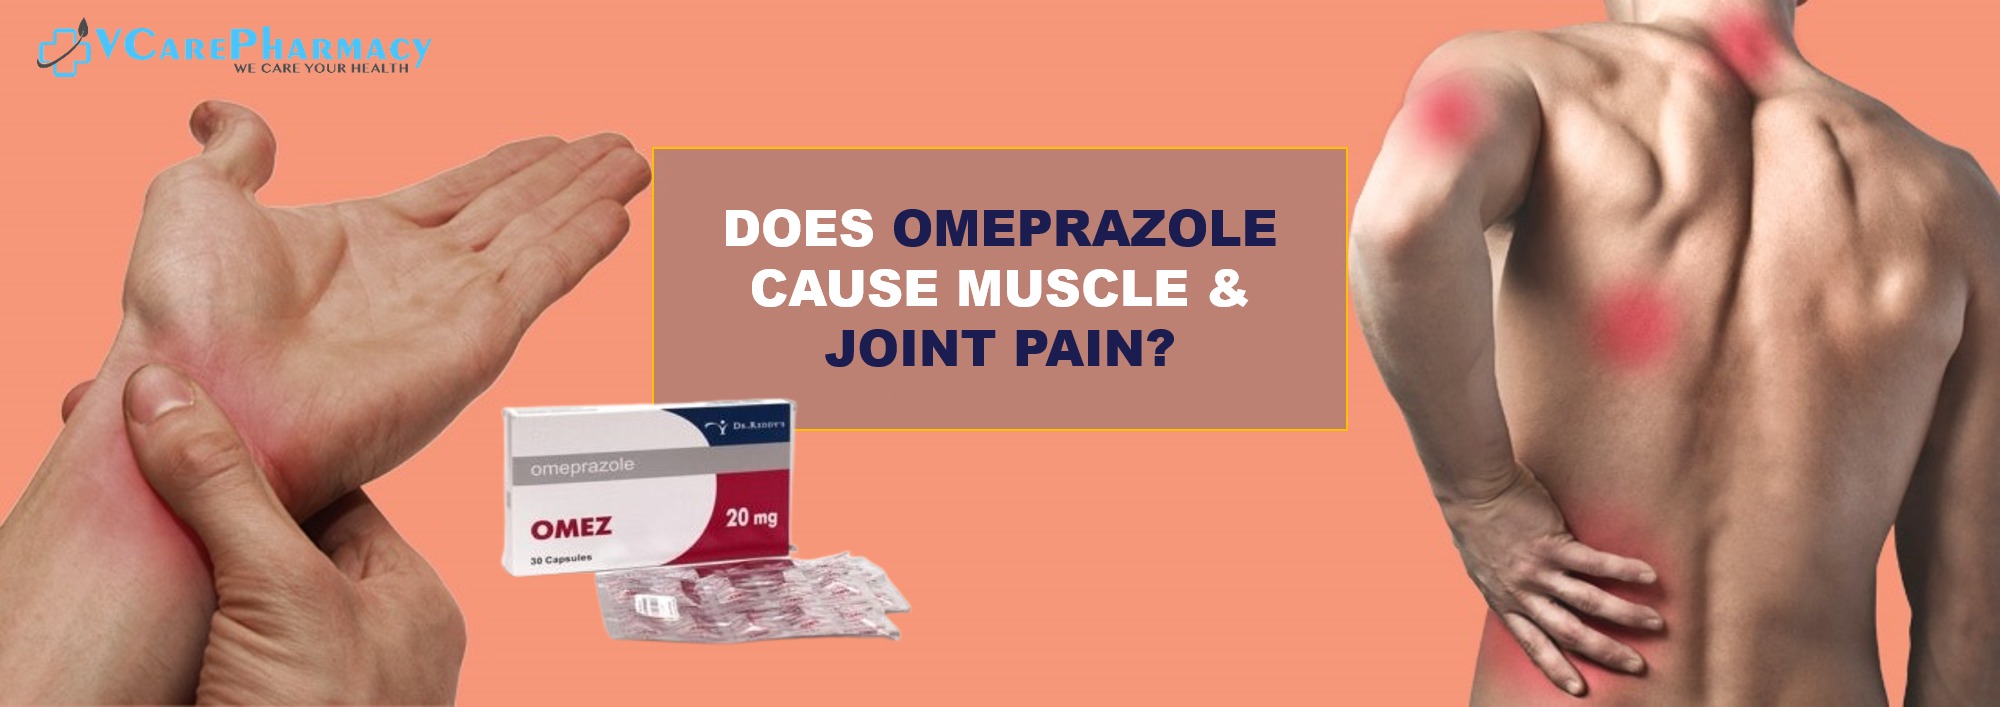 Does omeprazole cause muscle and joint pain?